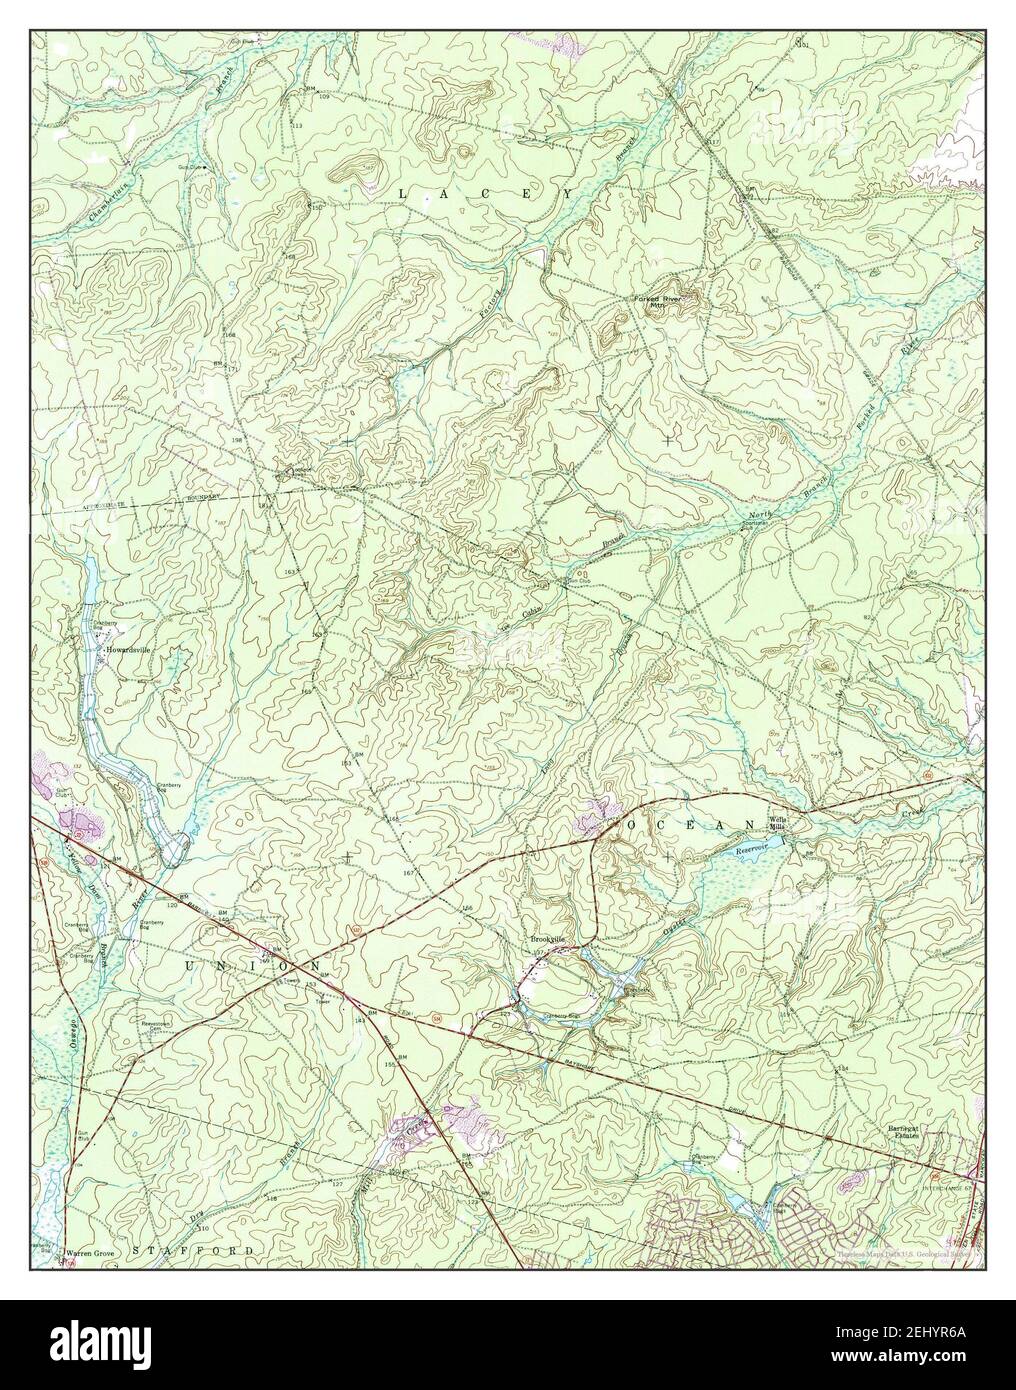 Brookville, New Jersey, map 1957, 1:24000, United States of America by Timeless Maps, data U.S. Geological Survey Stock Photo